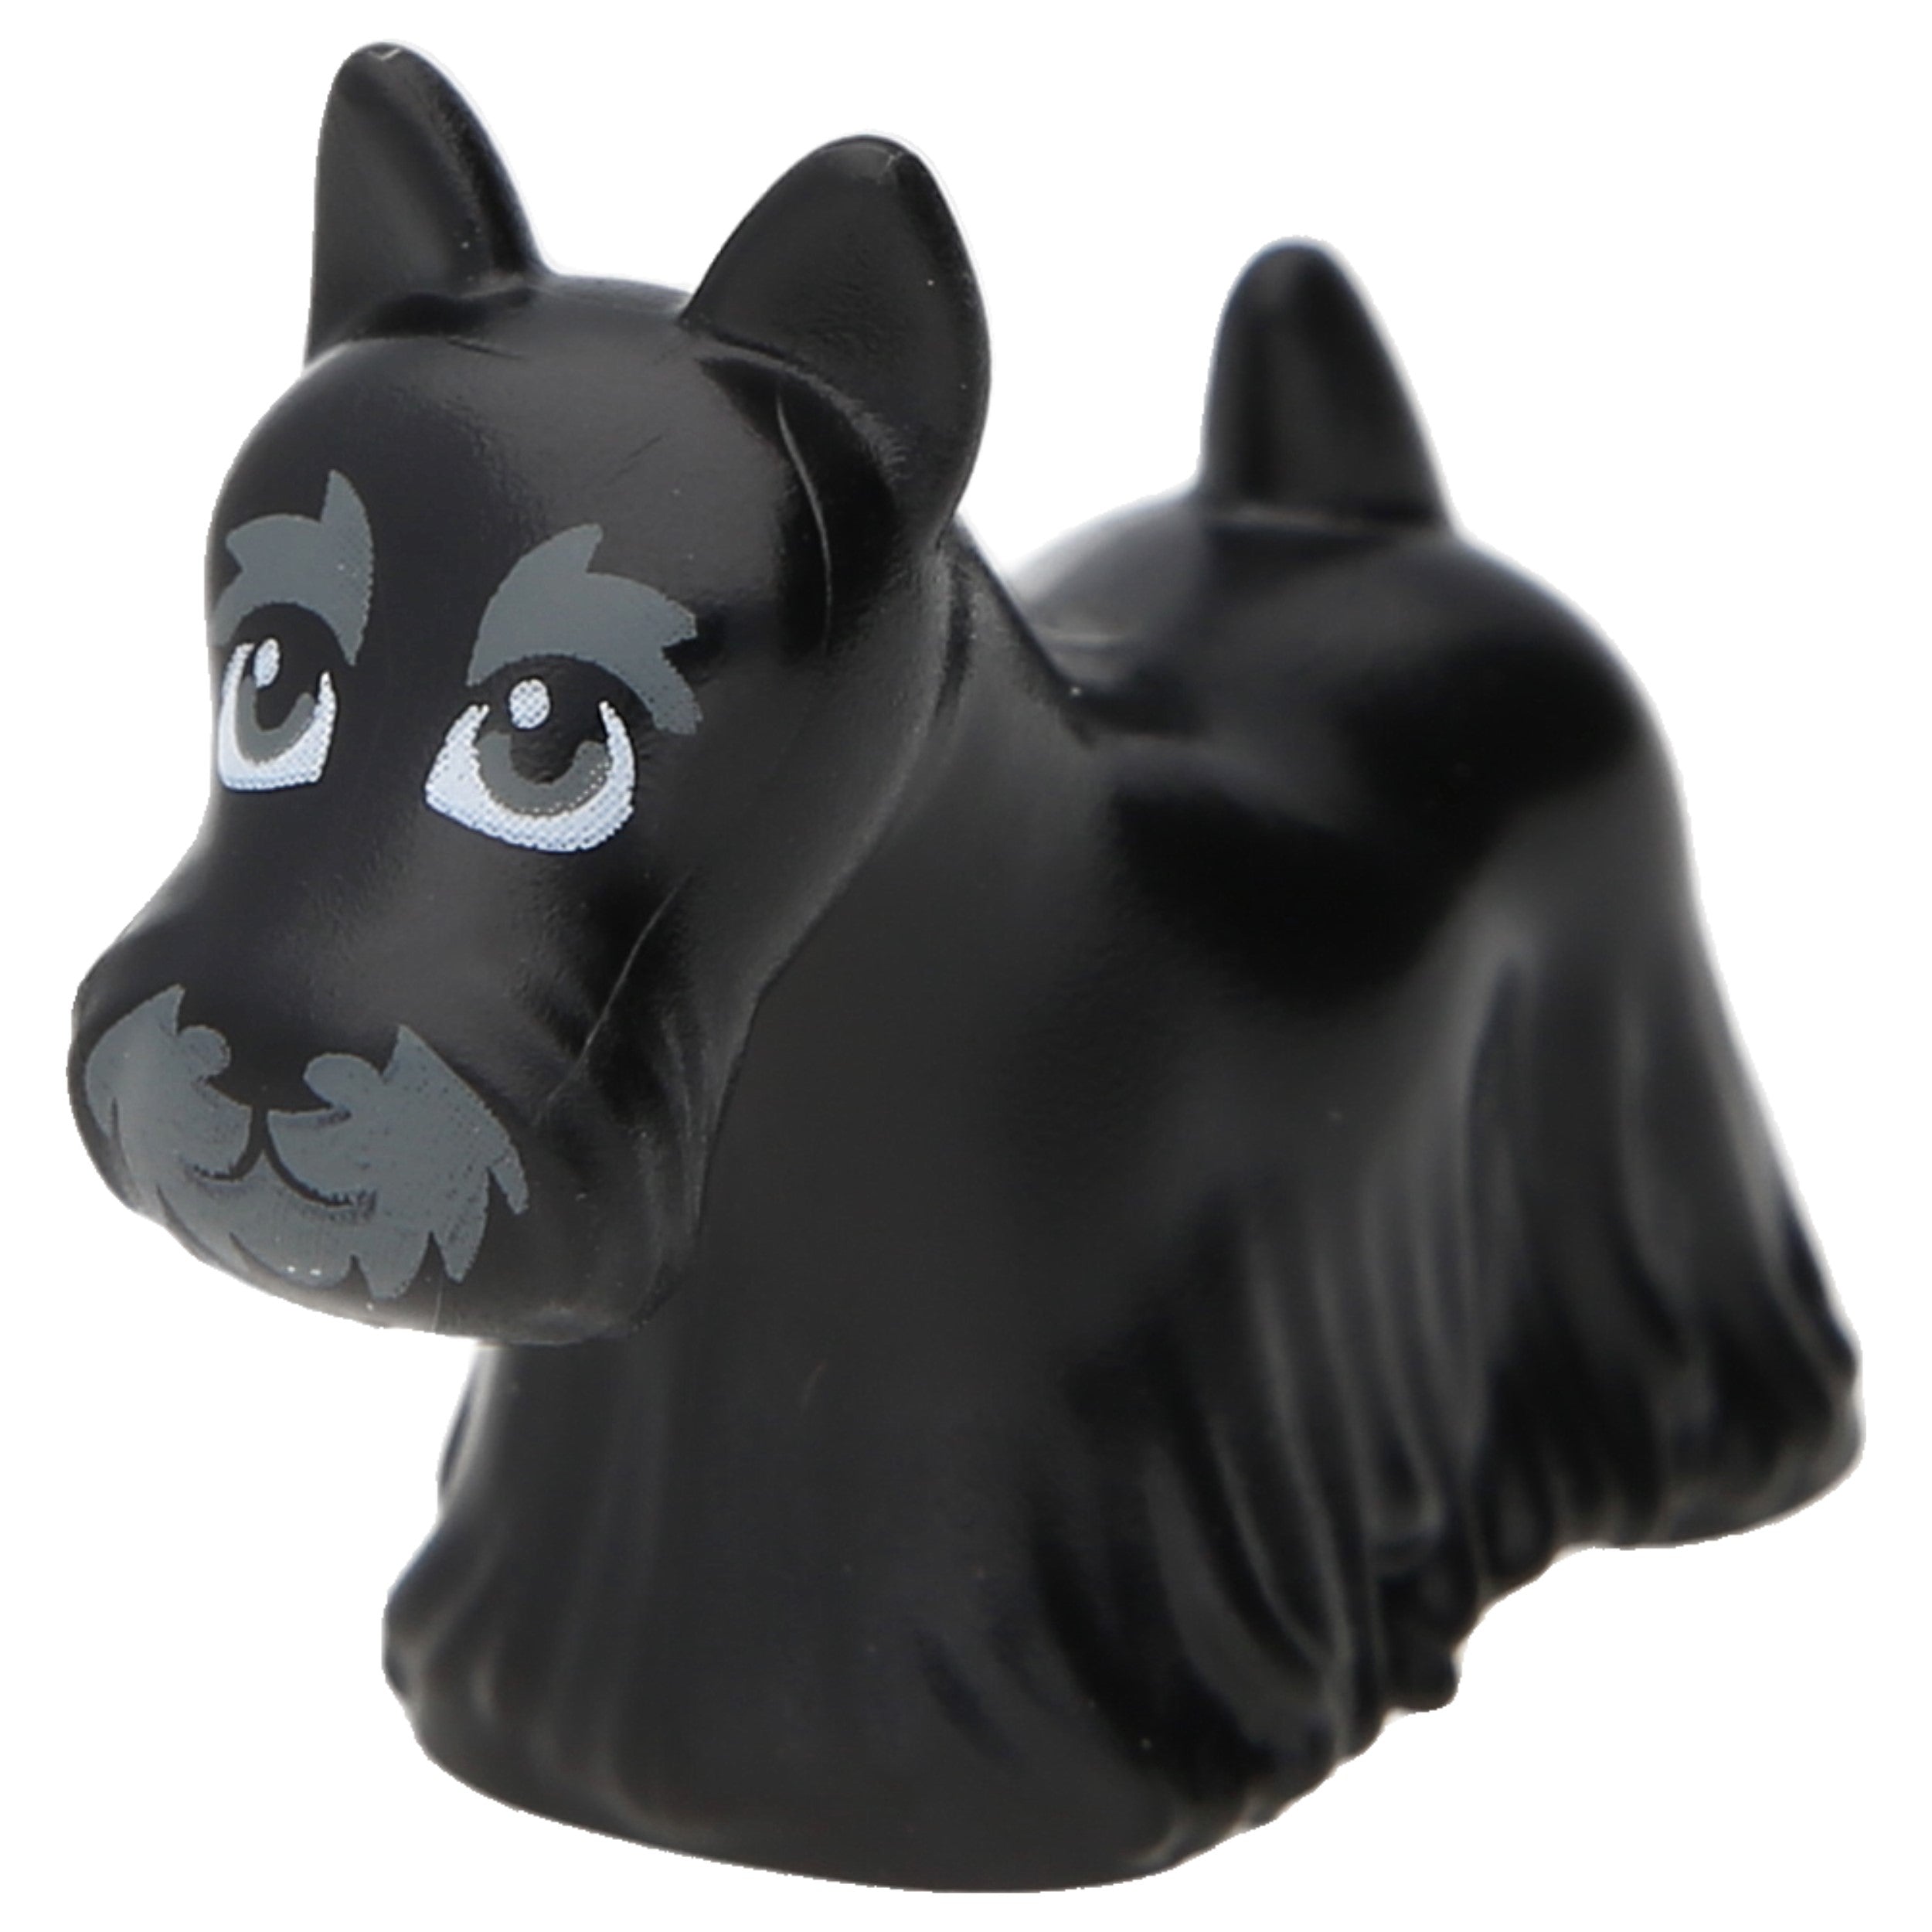 Lego dogs - Scottish terrier with dark gray eyes and snout (black)